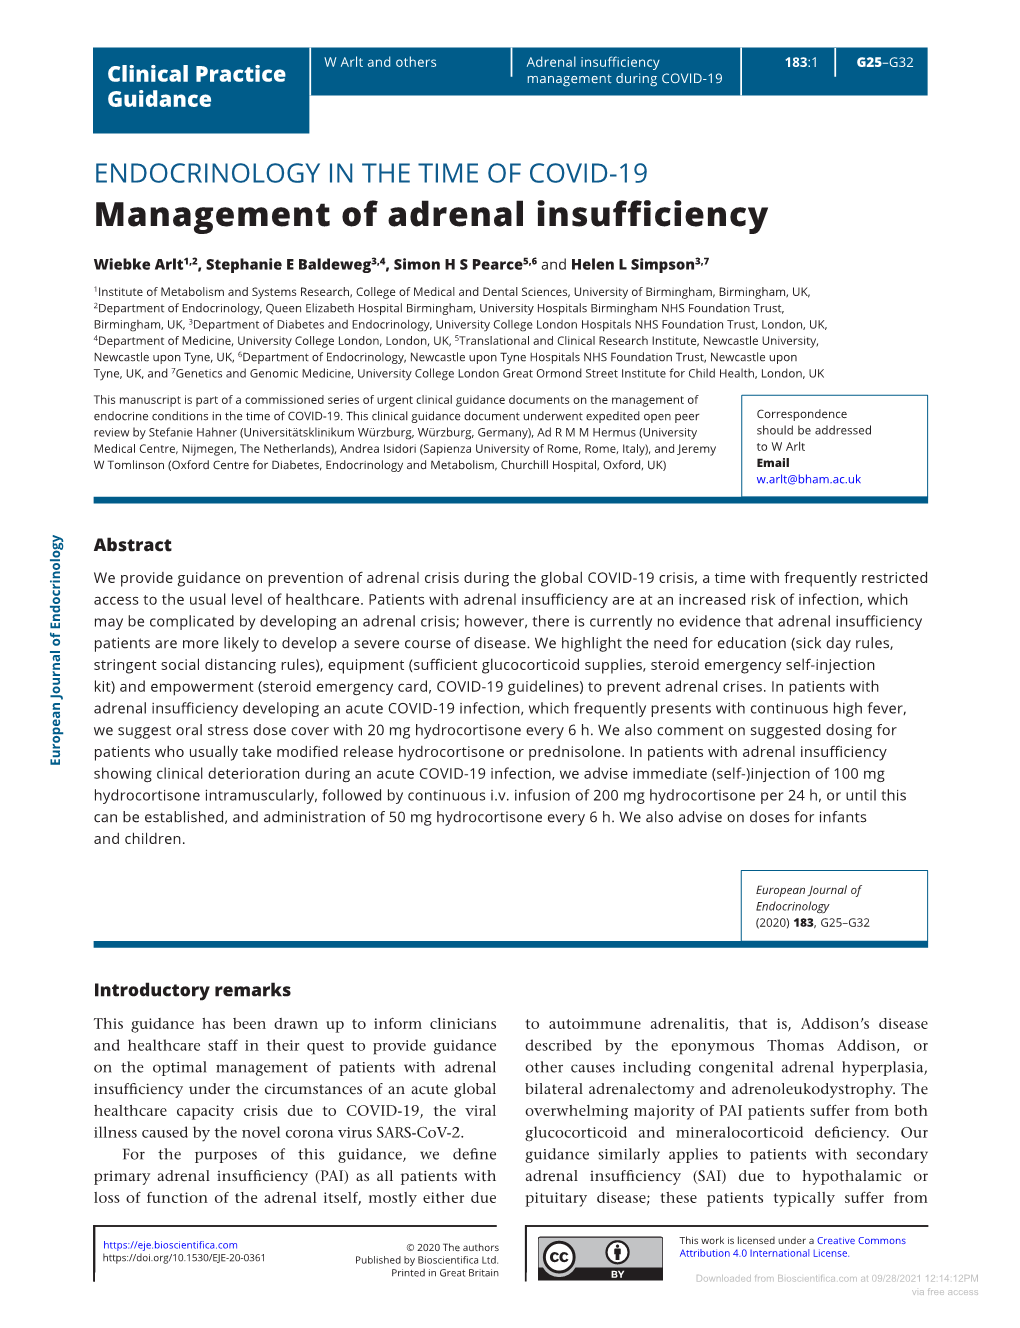 Management of Adrenal Insufficiency